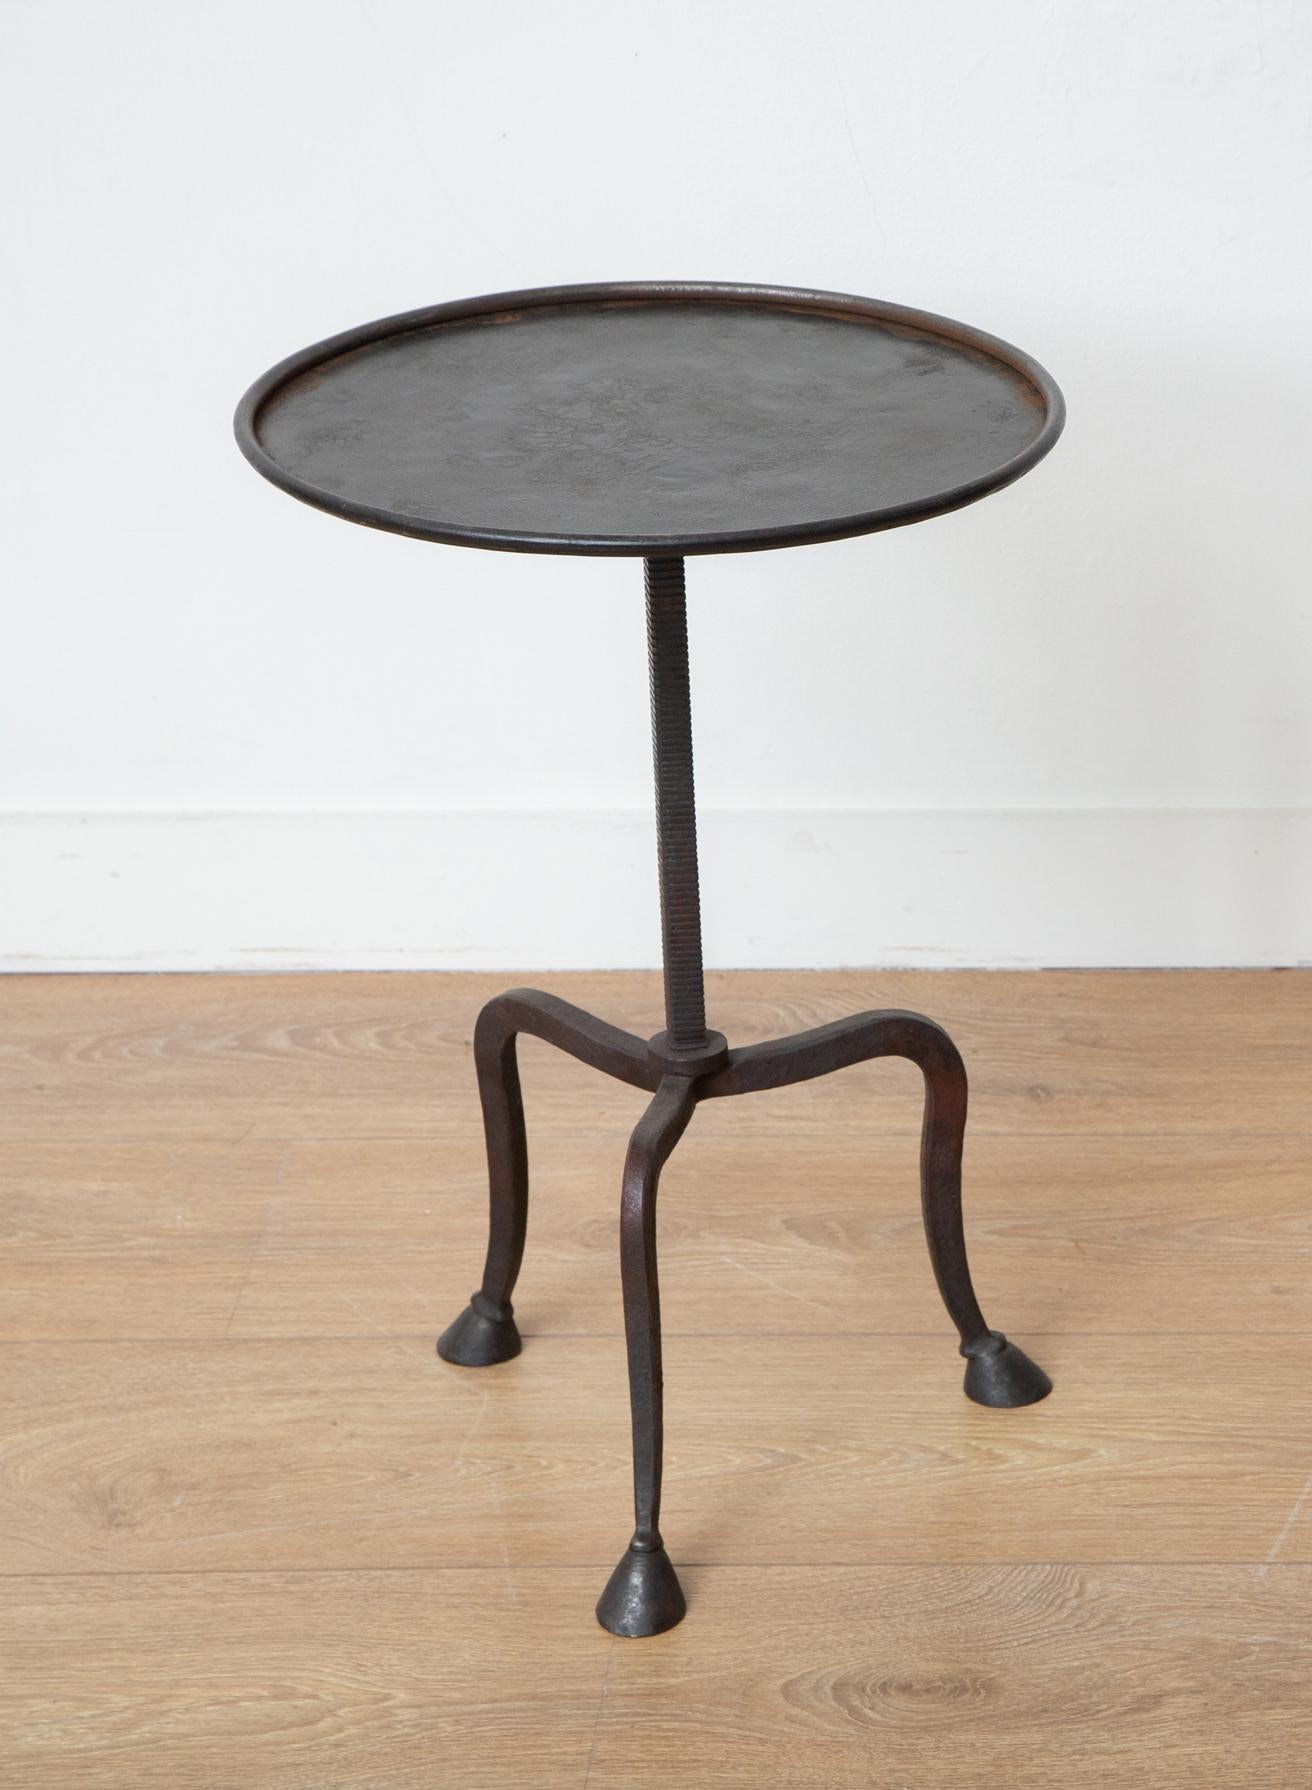 Tripod hand-forged side or drinks tables, in stock.
This stunning wrought iron tripod side table with hoof legs is an eye-catching addition to any home decor. Its round top features a lip, and its hammered metal frame has a beautiful black patina